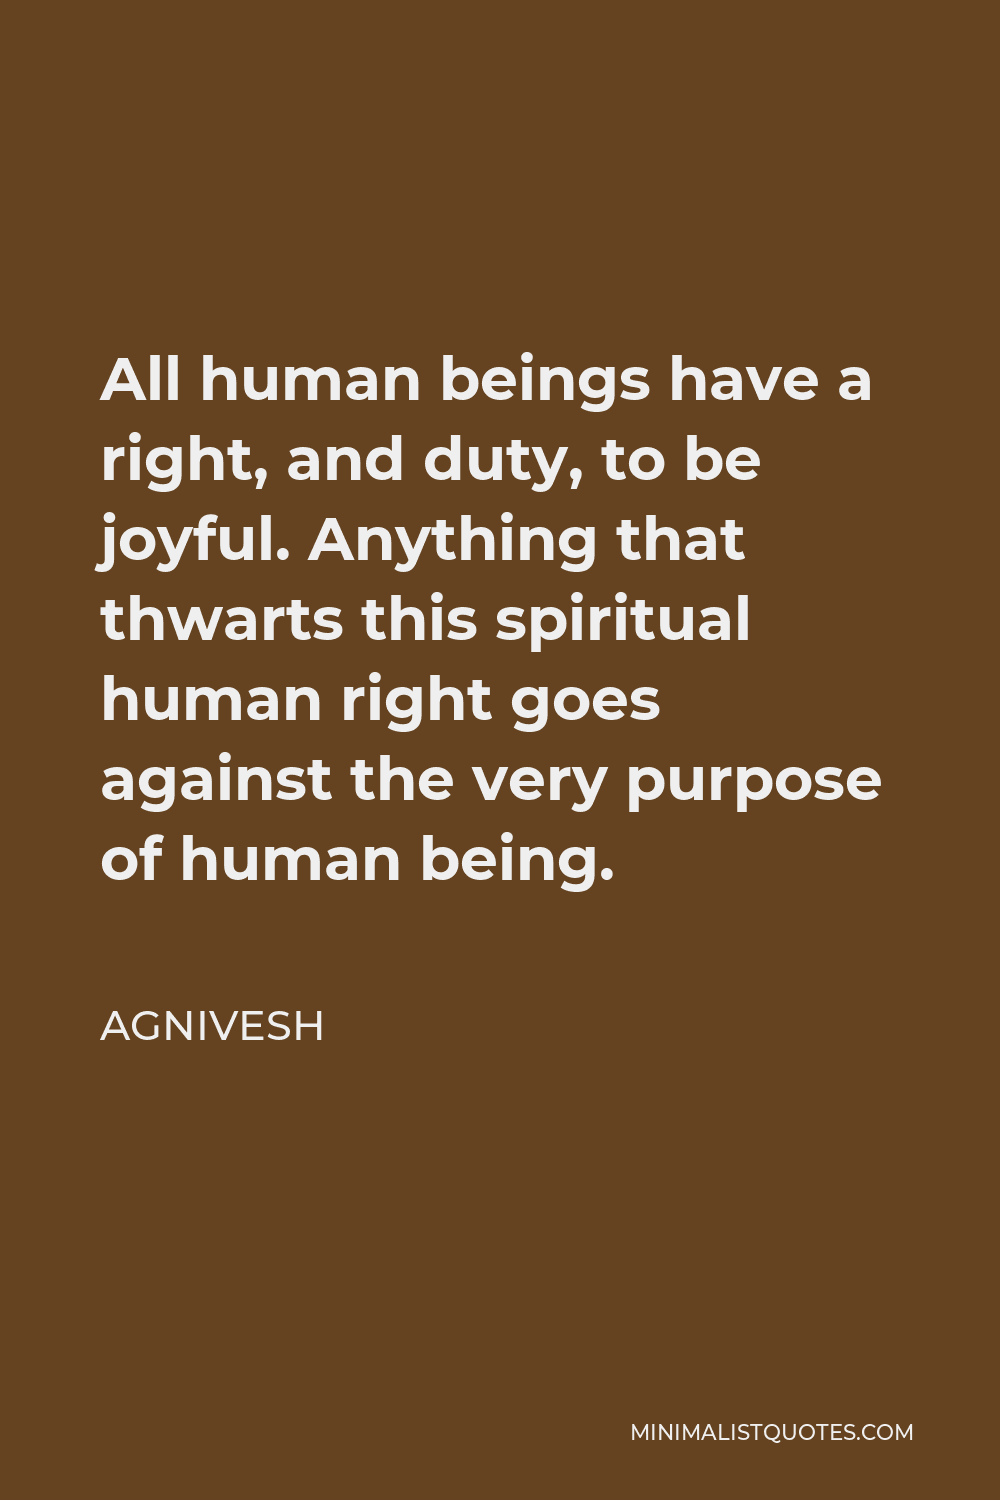 Agnivesh Quote - All human beings have a right, and duty, to be joyful. Anything that thwarts this spiritual human right goes against the very purpose of human being.